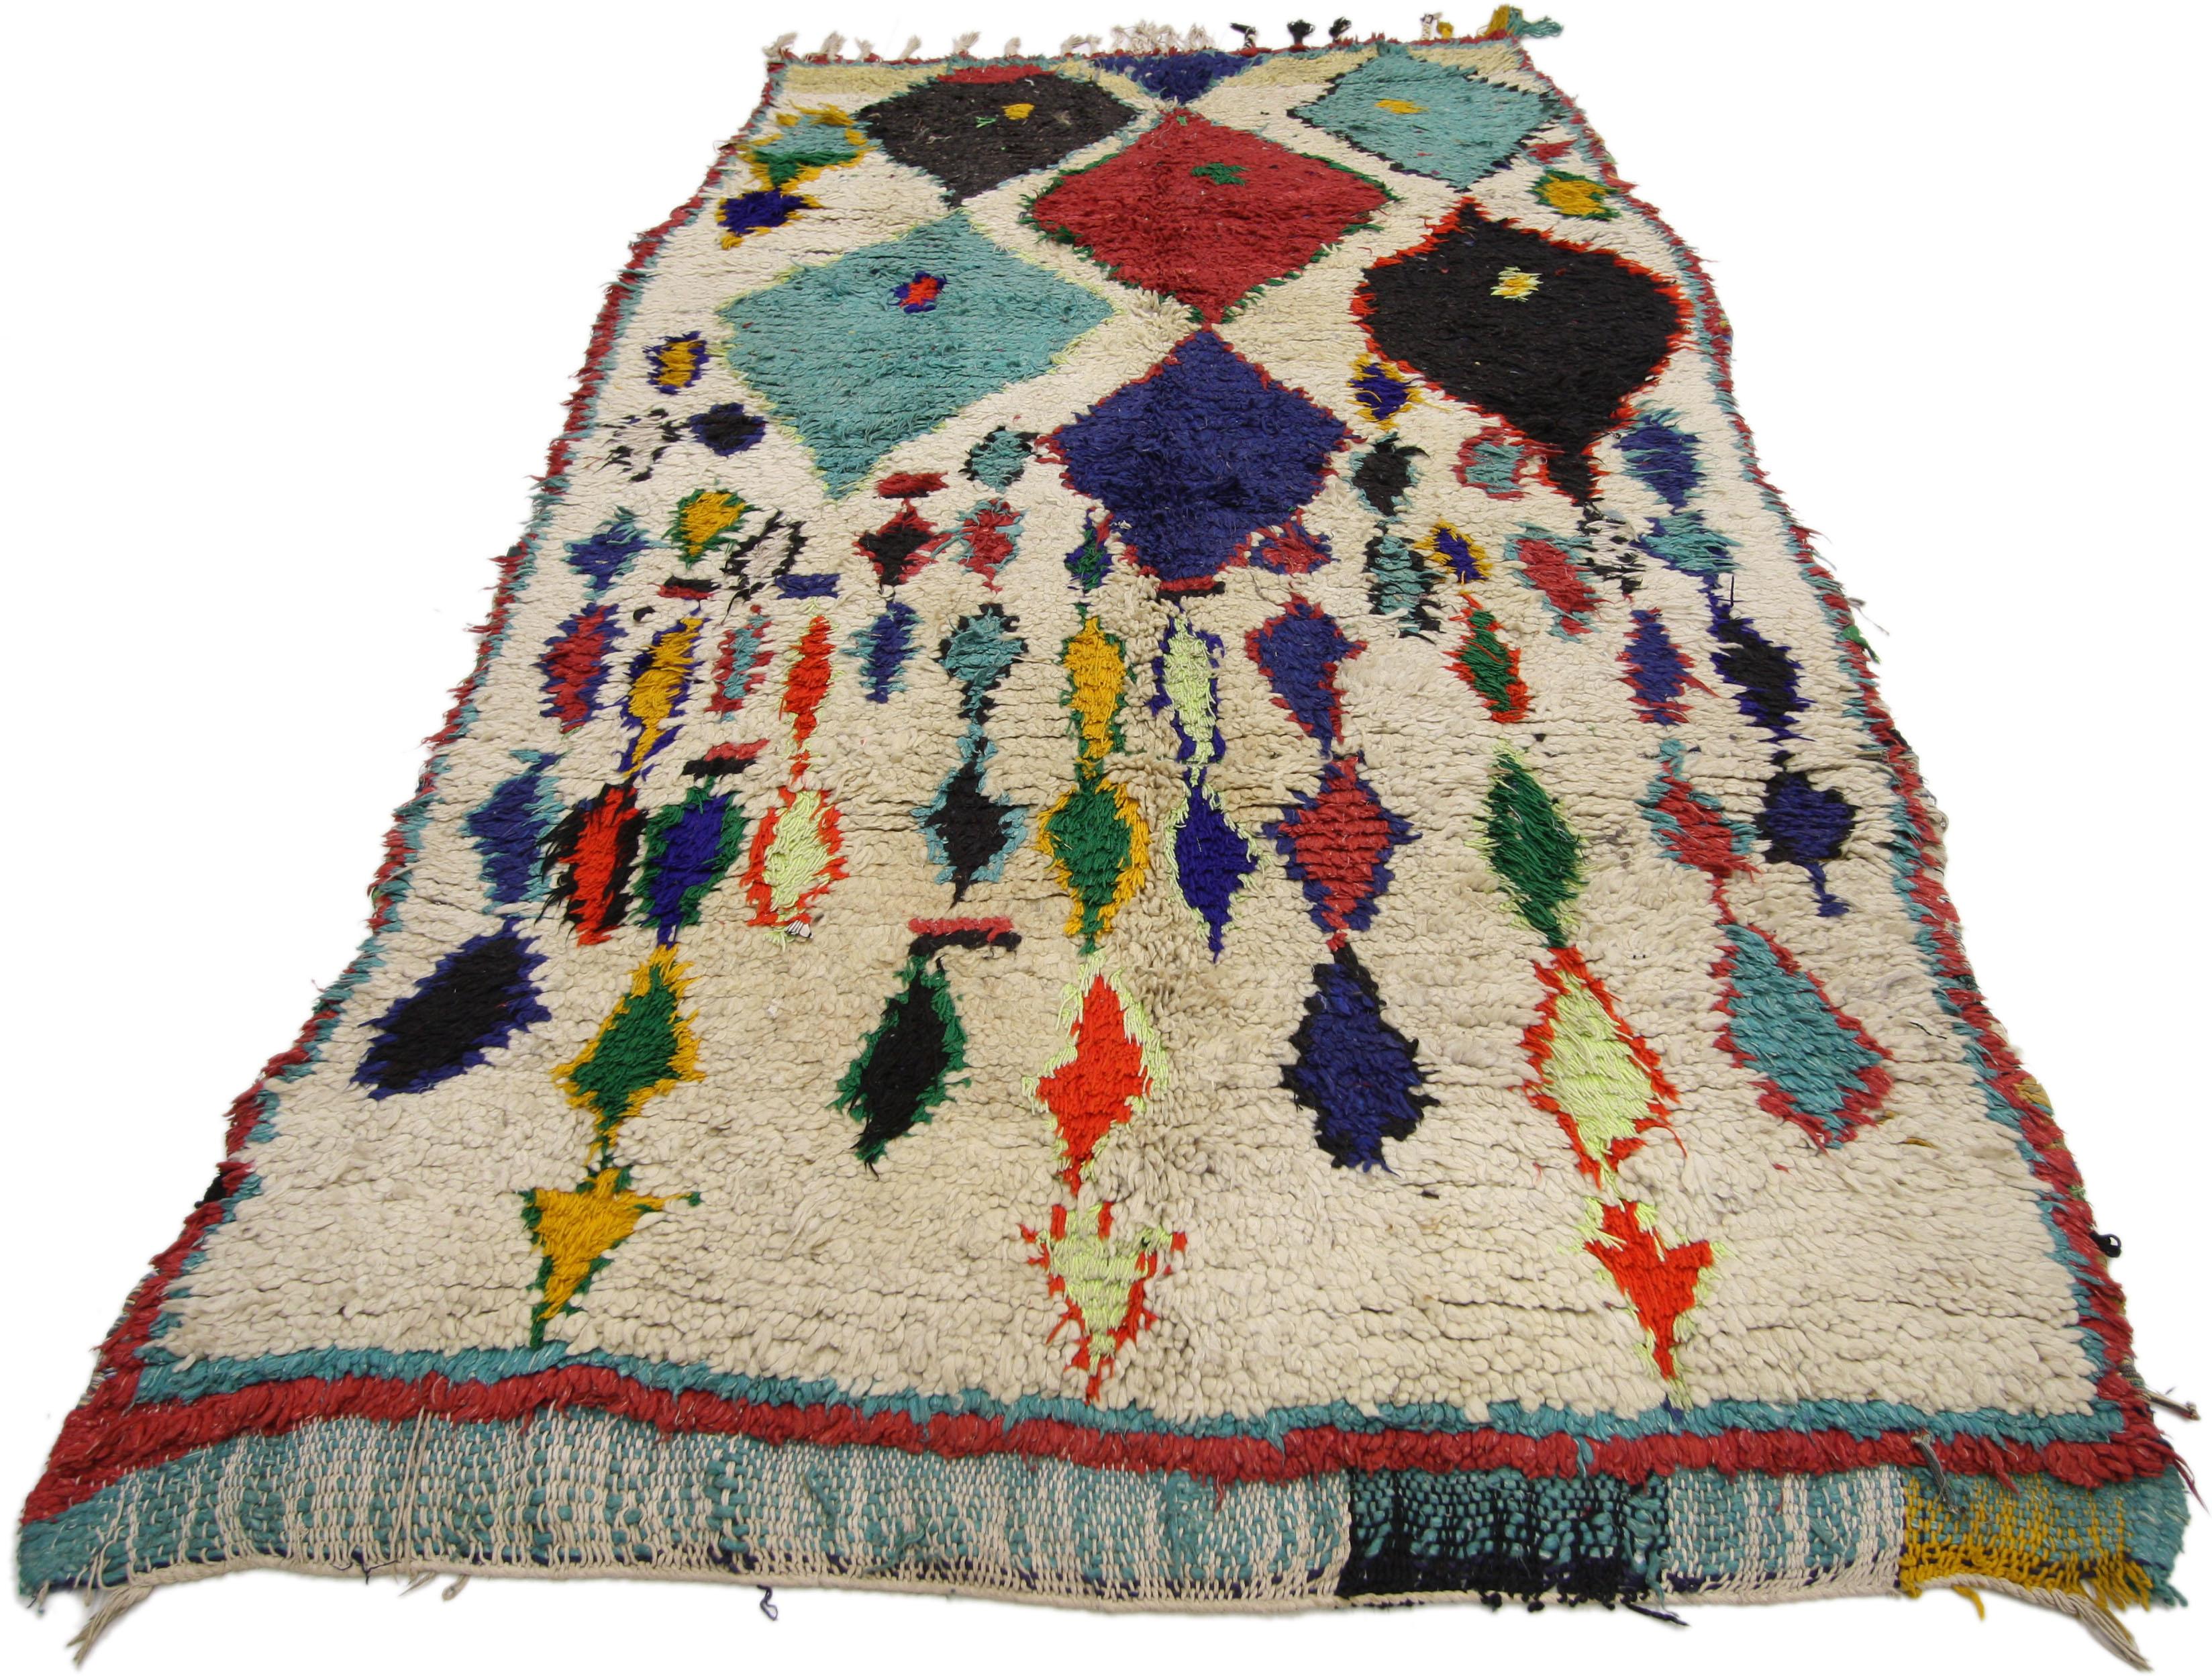 Hand-Knotted Vintage Berber Moroccan Azilal Rug with Tribal Boho Chic Style